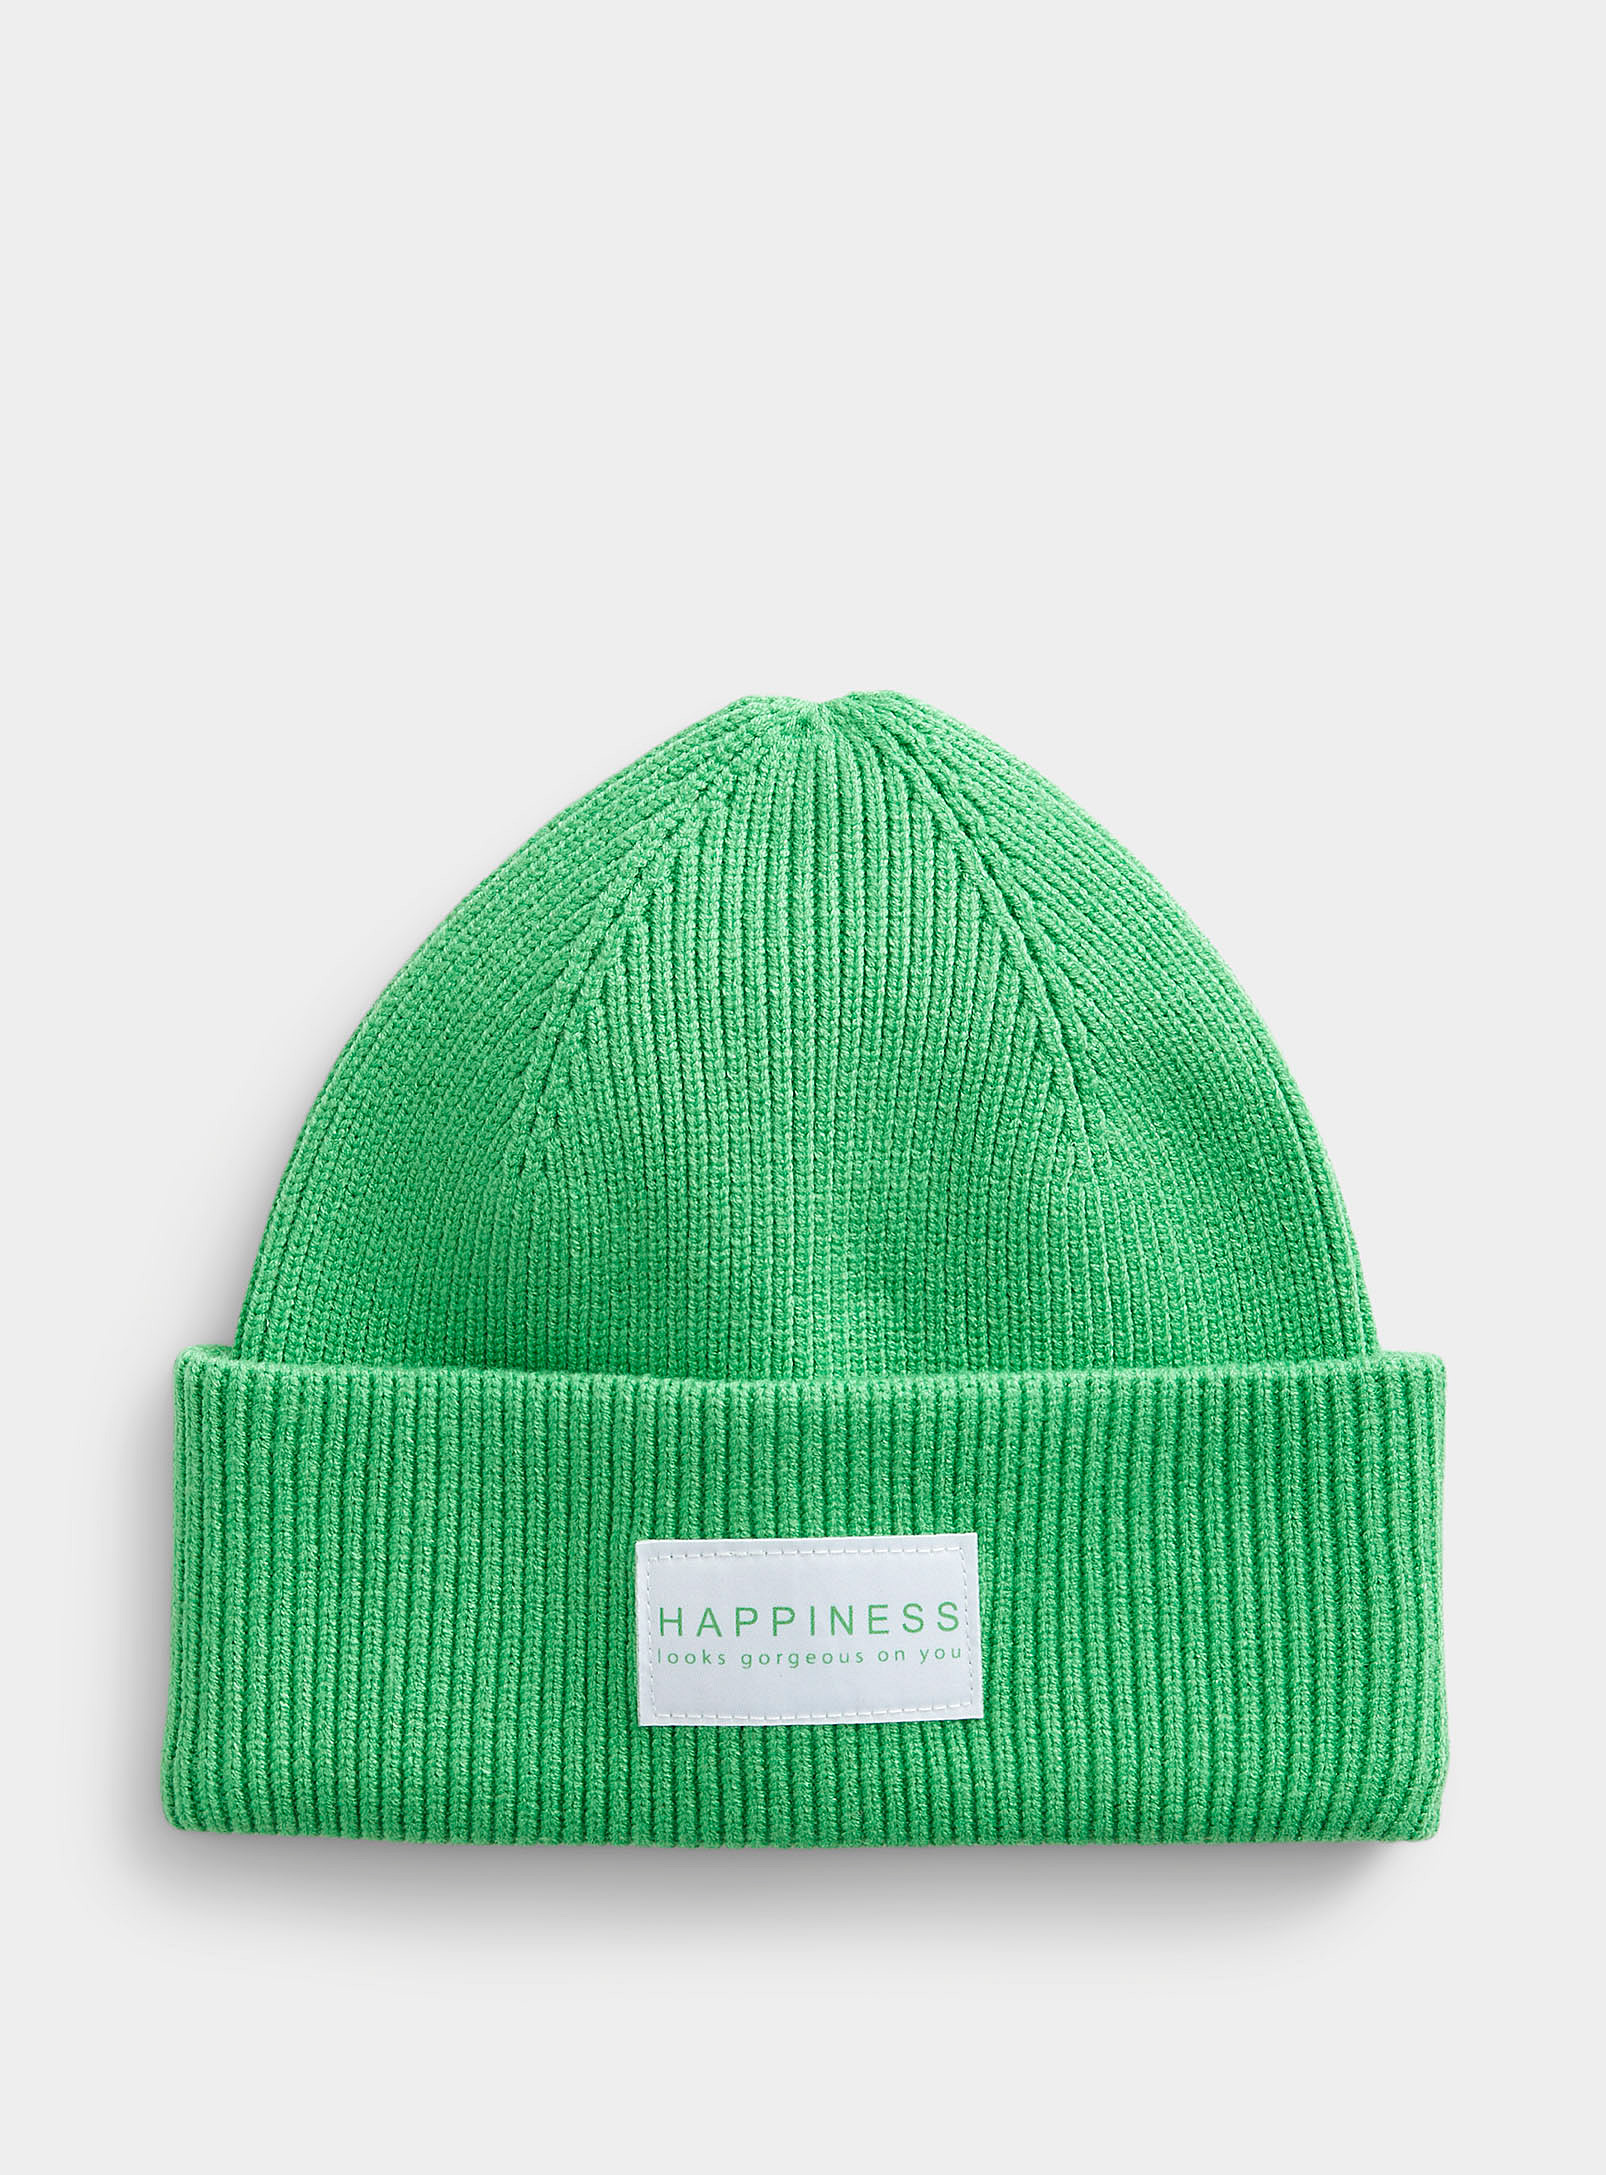 Only Positive Emblem Ribbed Tuque In Bottle Green